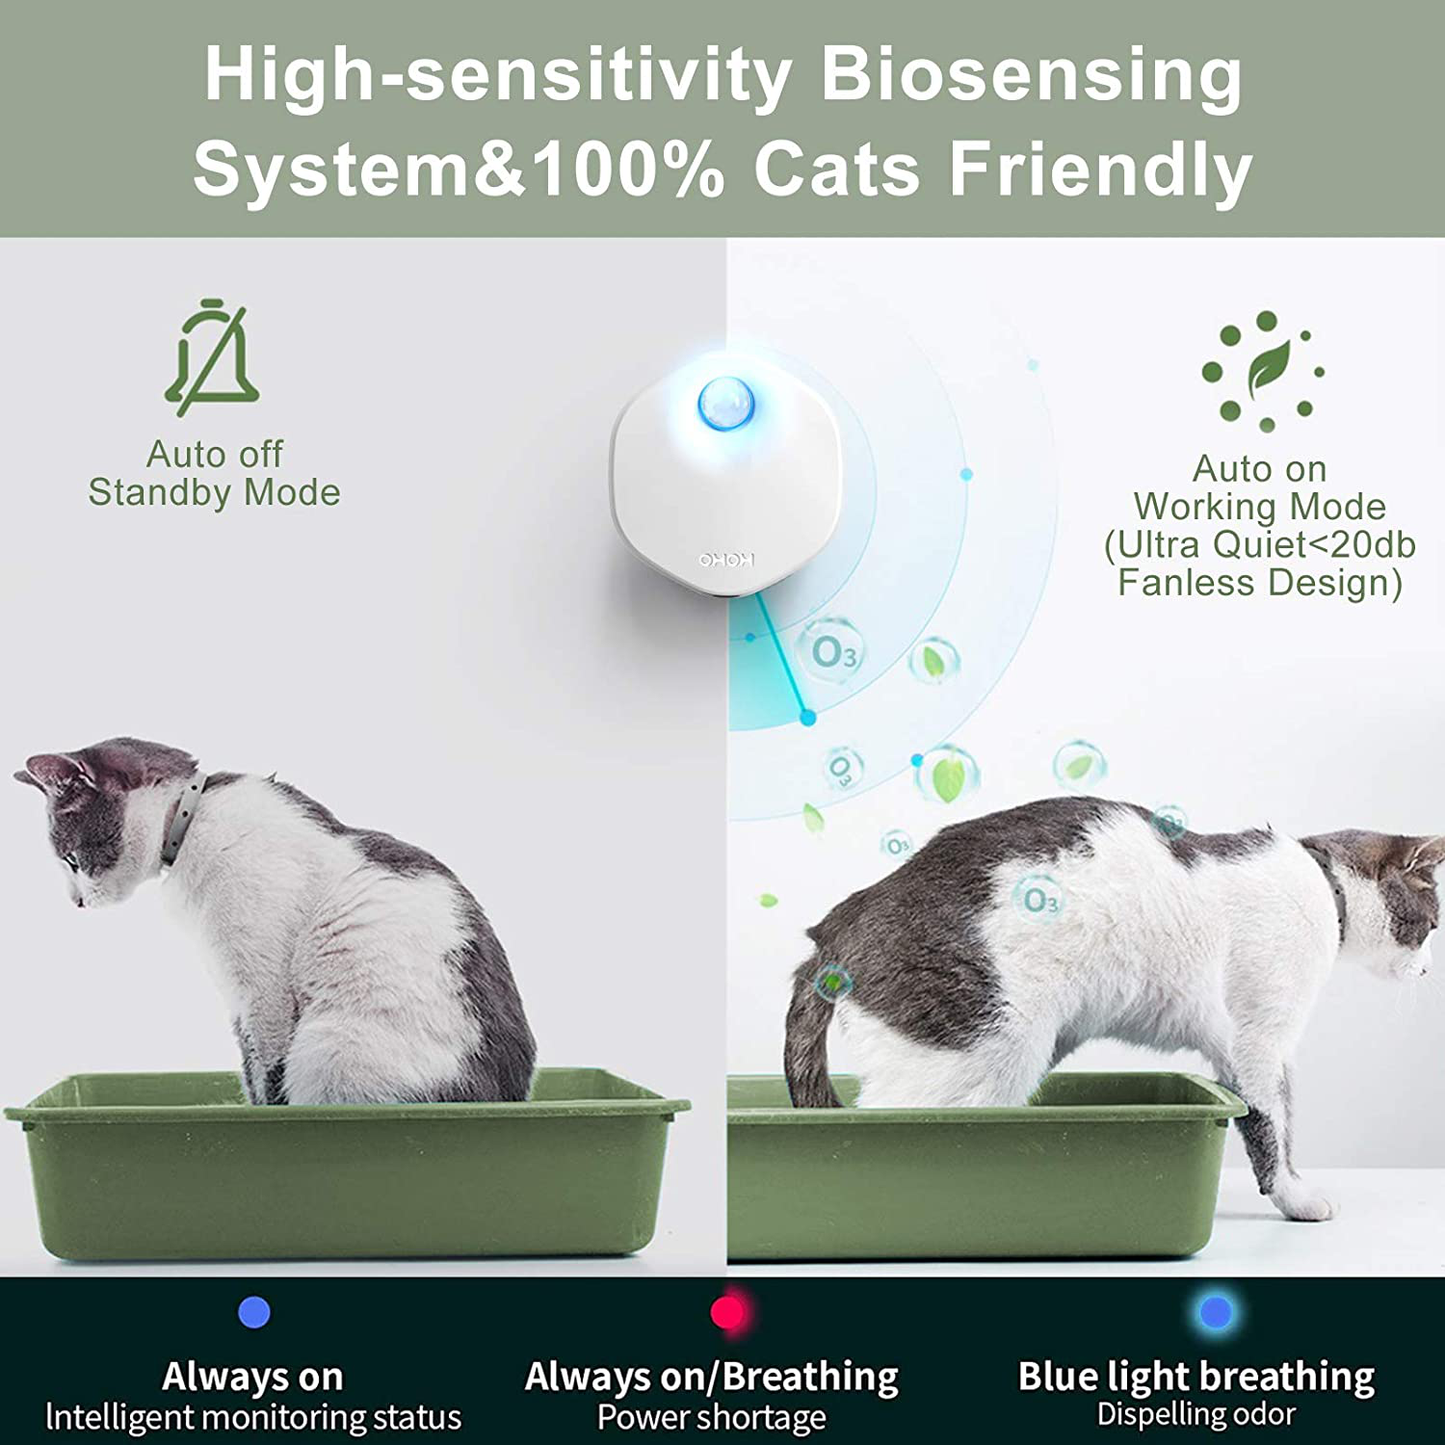 Electronic Cat Litter Deodorizer, Intelligent Sensor Deodorization 99.9% Dust-Free 7-Day Battery Life Remover for All Kinds of Cat Litter Box Restroom Wardrobe Kitchen Car and Small Area (Single Head)